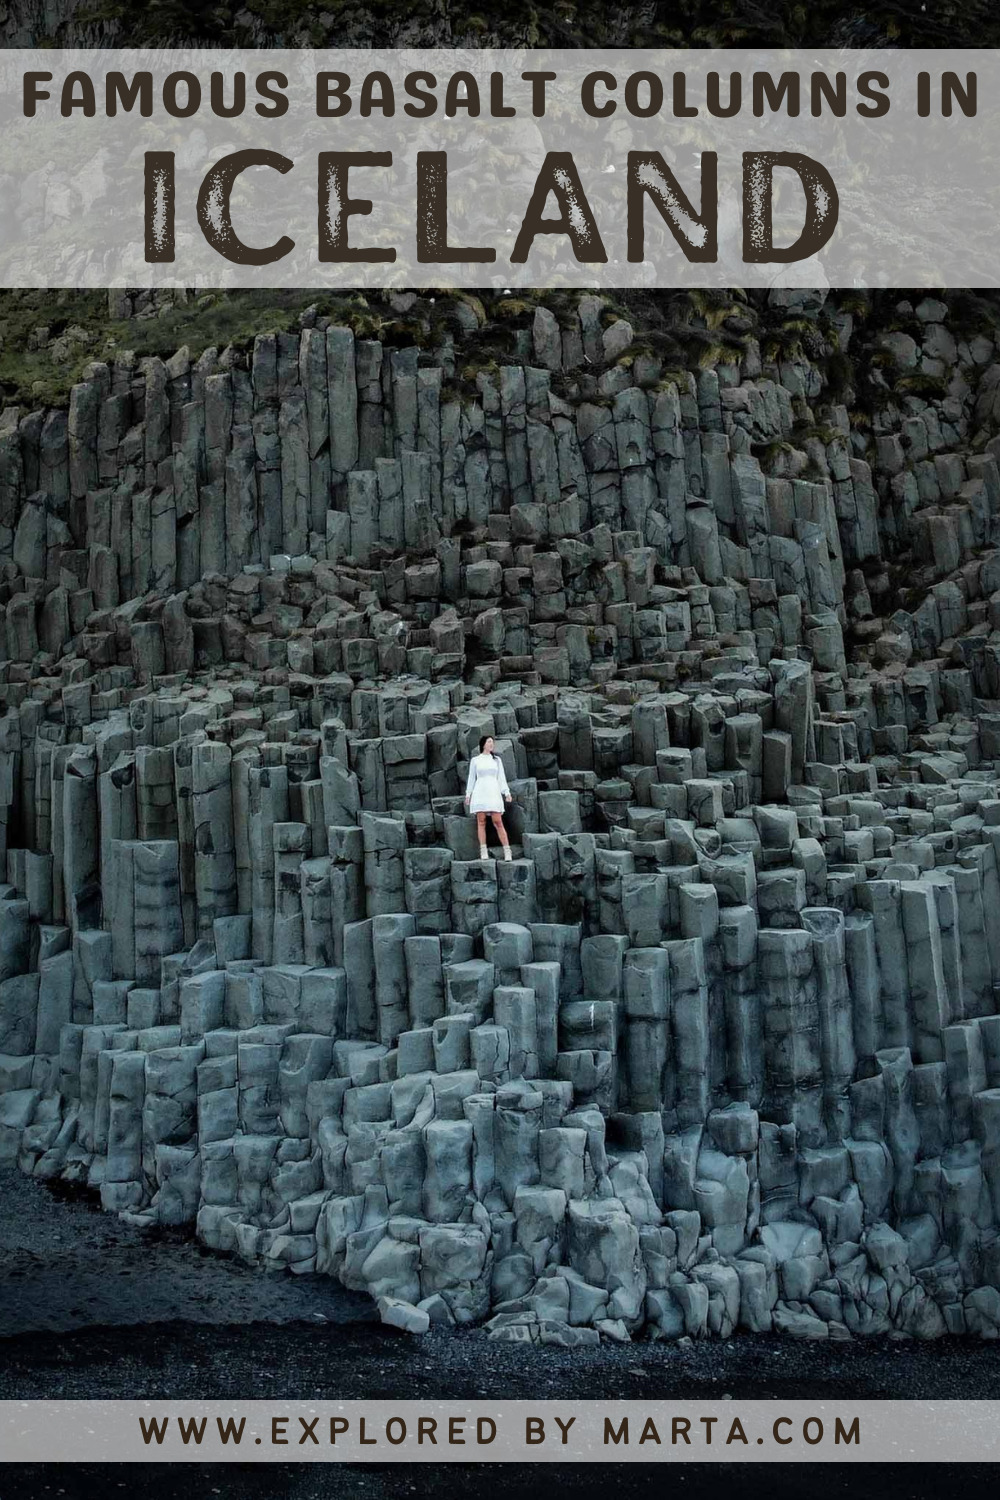 Here are the famous basalt columns in Iceland